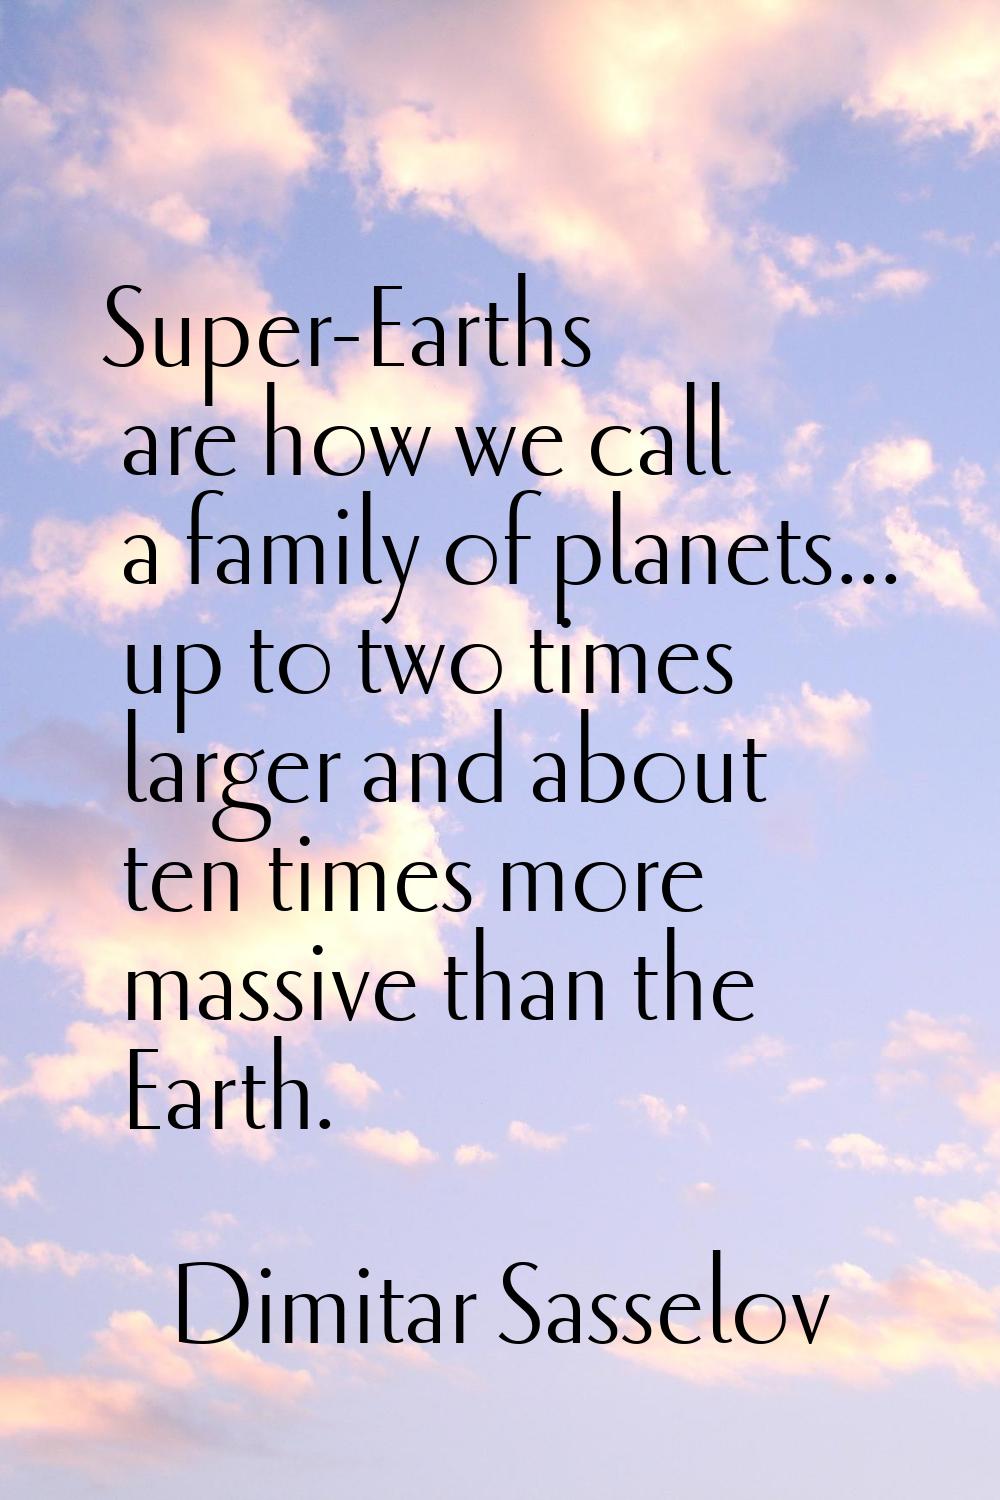 Super-Earths are how we call a family of planets... up to two times larger and about ten times more